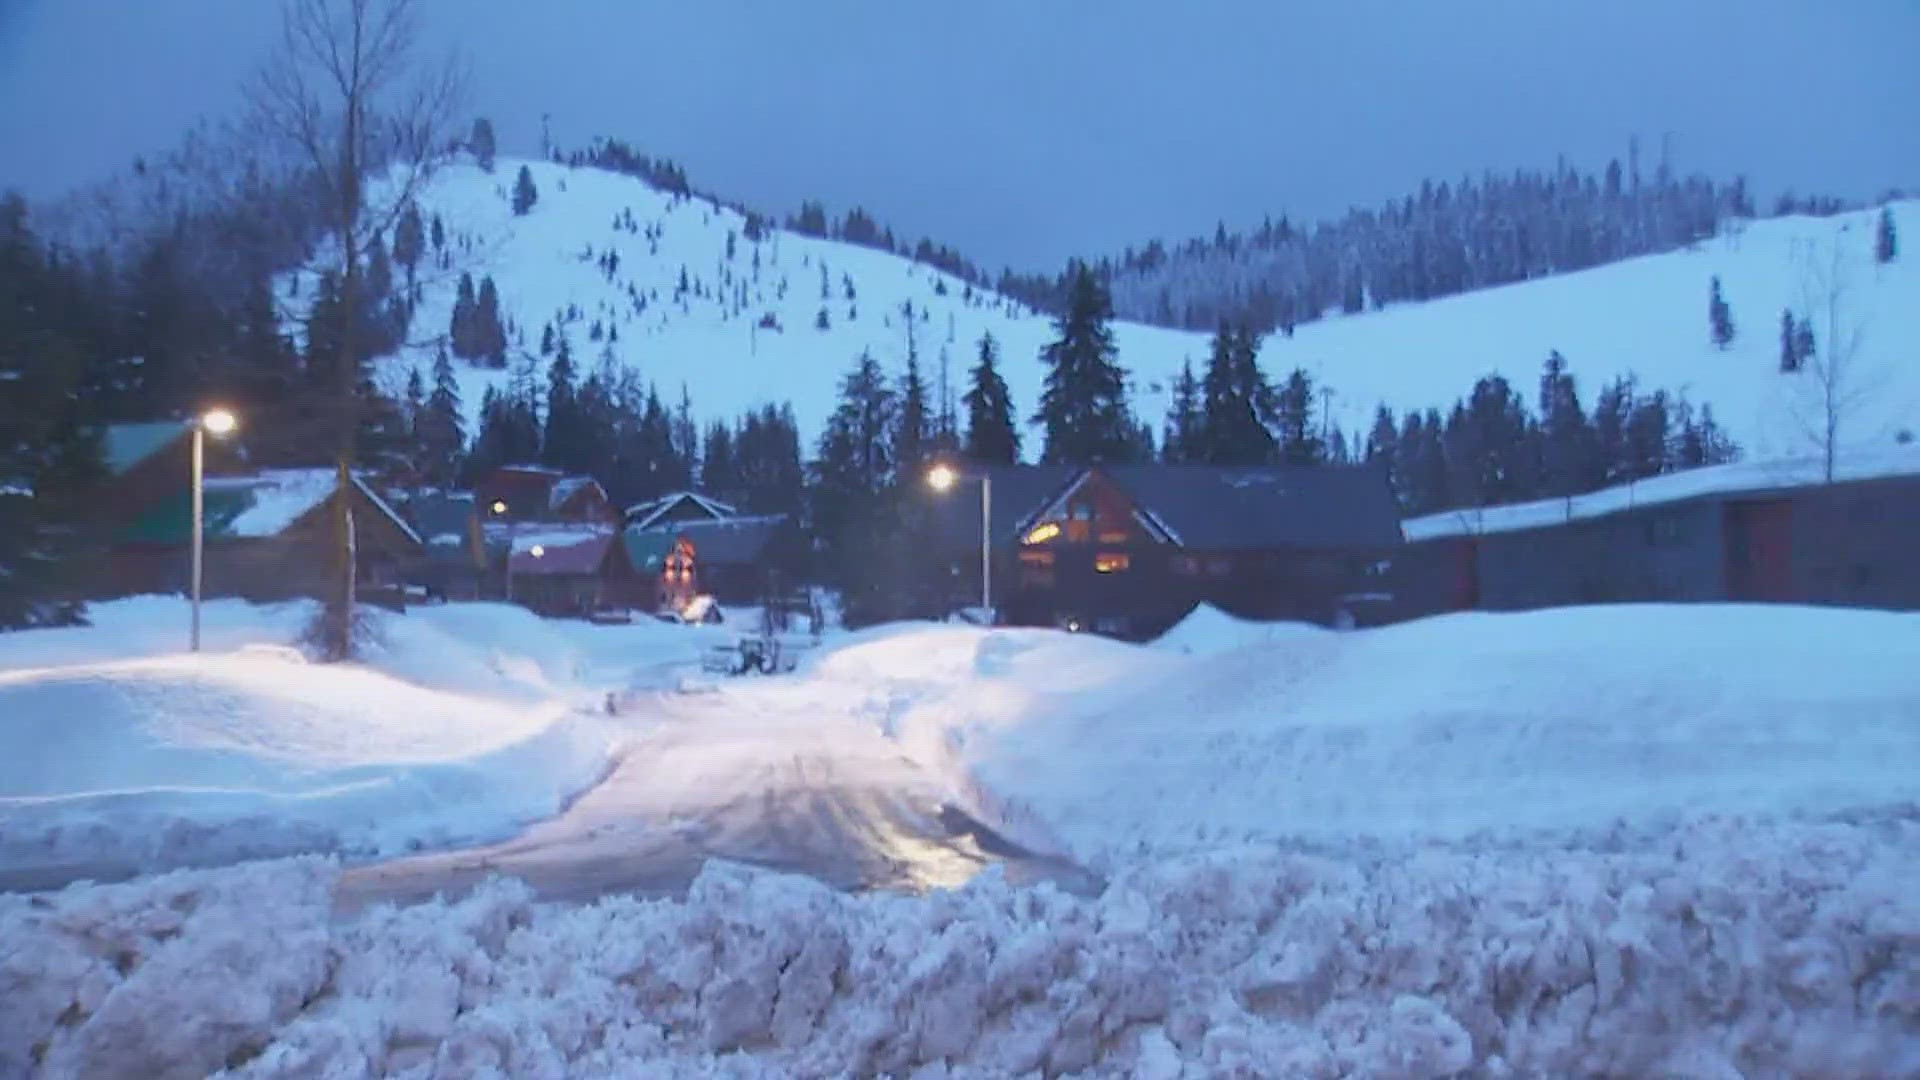 Tuesday's snow is turning to Wednesday's slush and slick driving conditions at Snoqualmie Pass